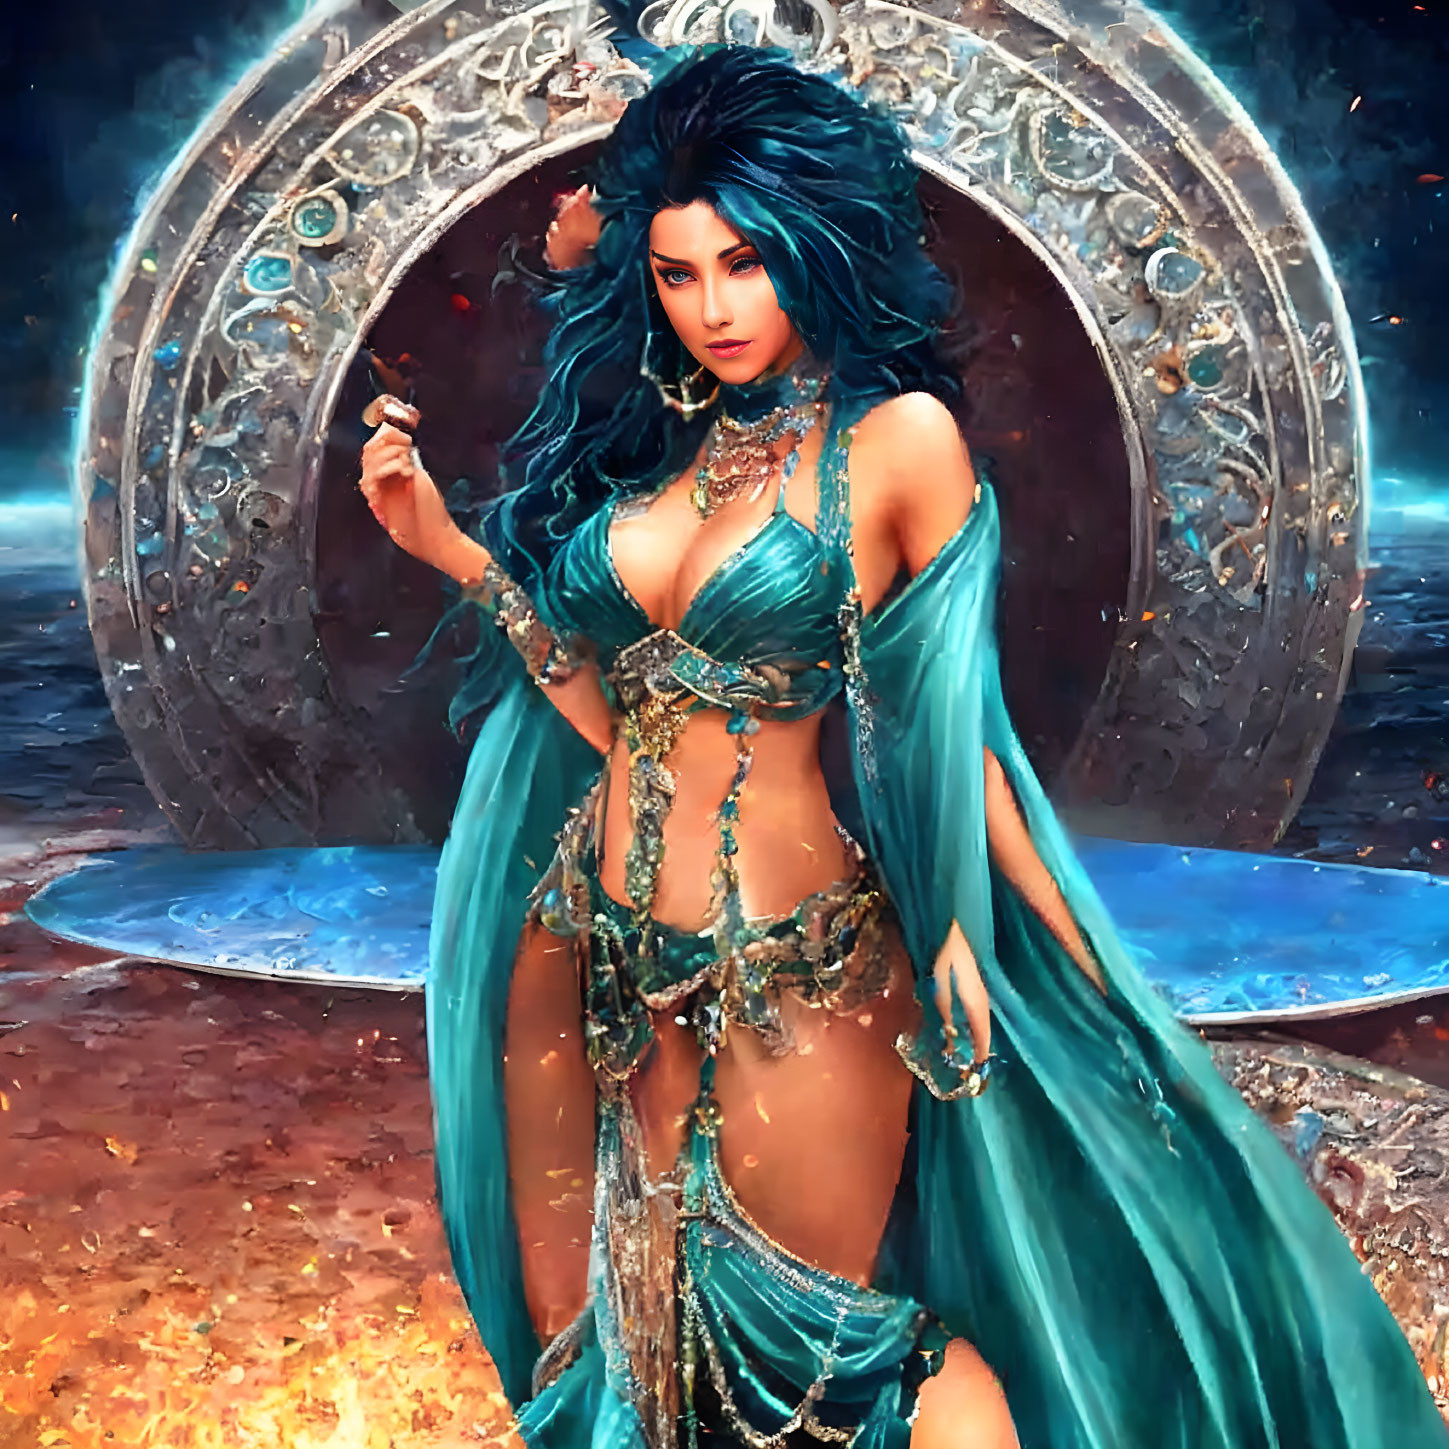 Blue-haired fantasy character in ornate setting with golden jewelry